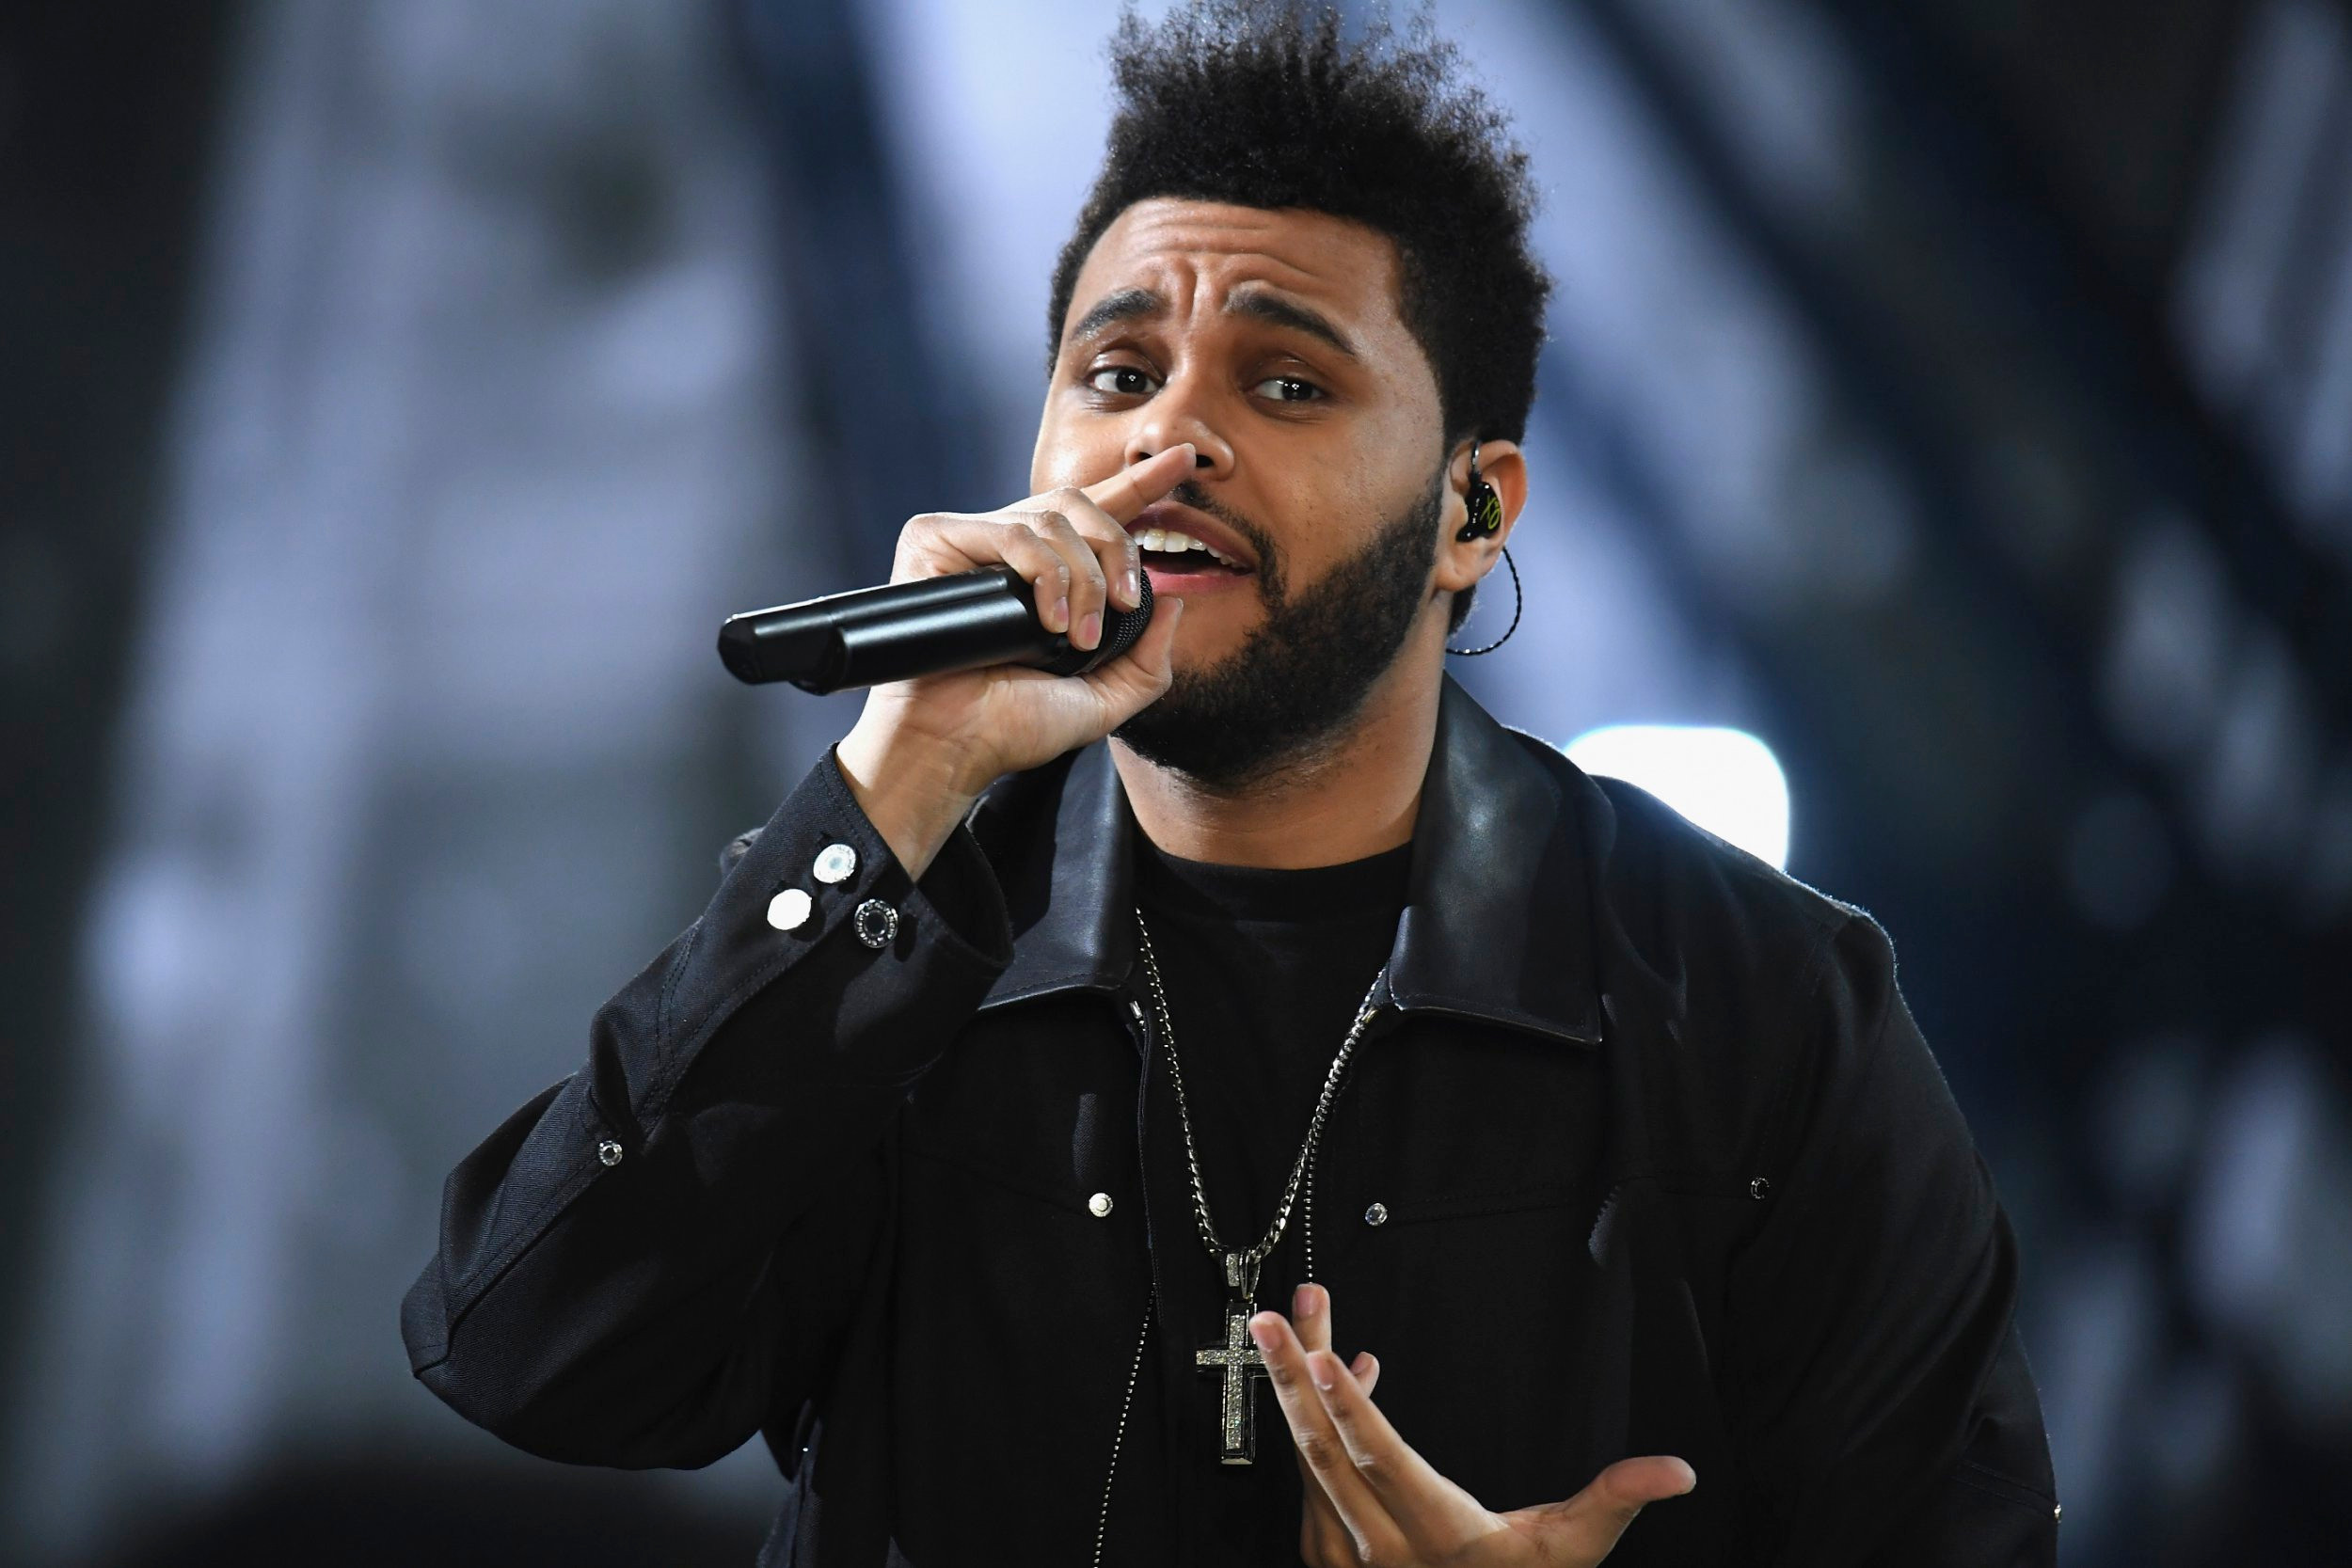 The Weeknd spending $7m of his own money on electric Super Bowl performance